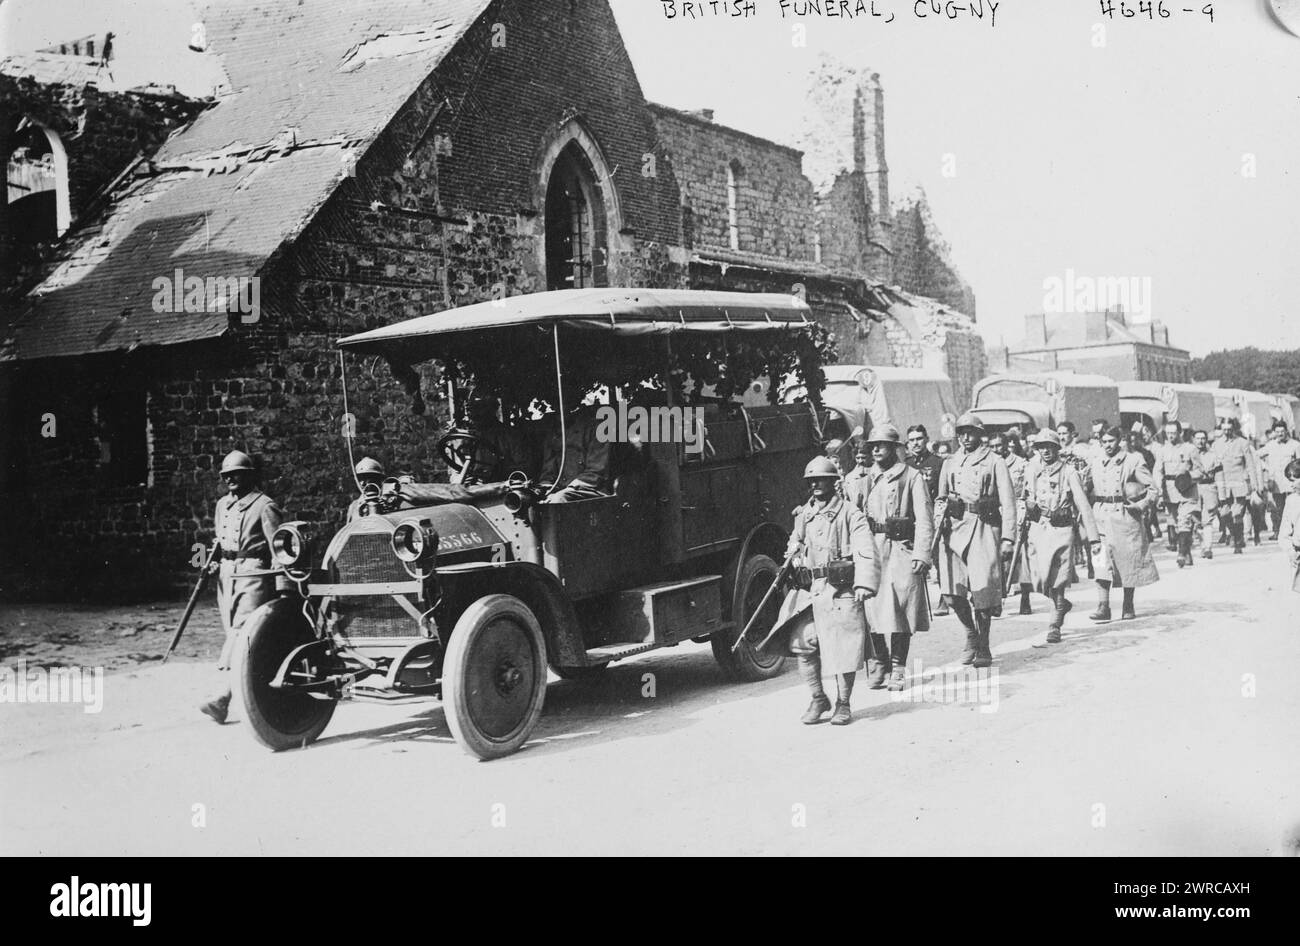 British funeral, Cugny, Photograph shows vehicle and soldiers passing a church during a funeral in Cugny, France, probably during World War I., between ca. 1915 and ca. 1920, World War, 1914-1918, Glass negatives, 1 negative: glass Stock Photo